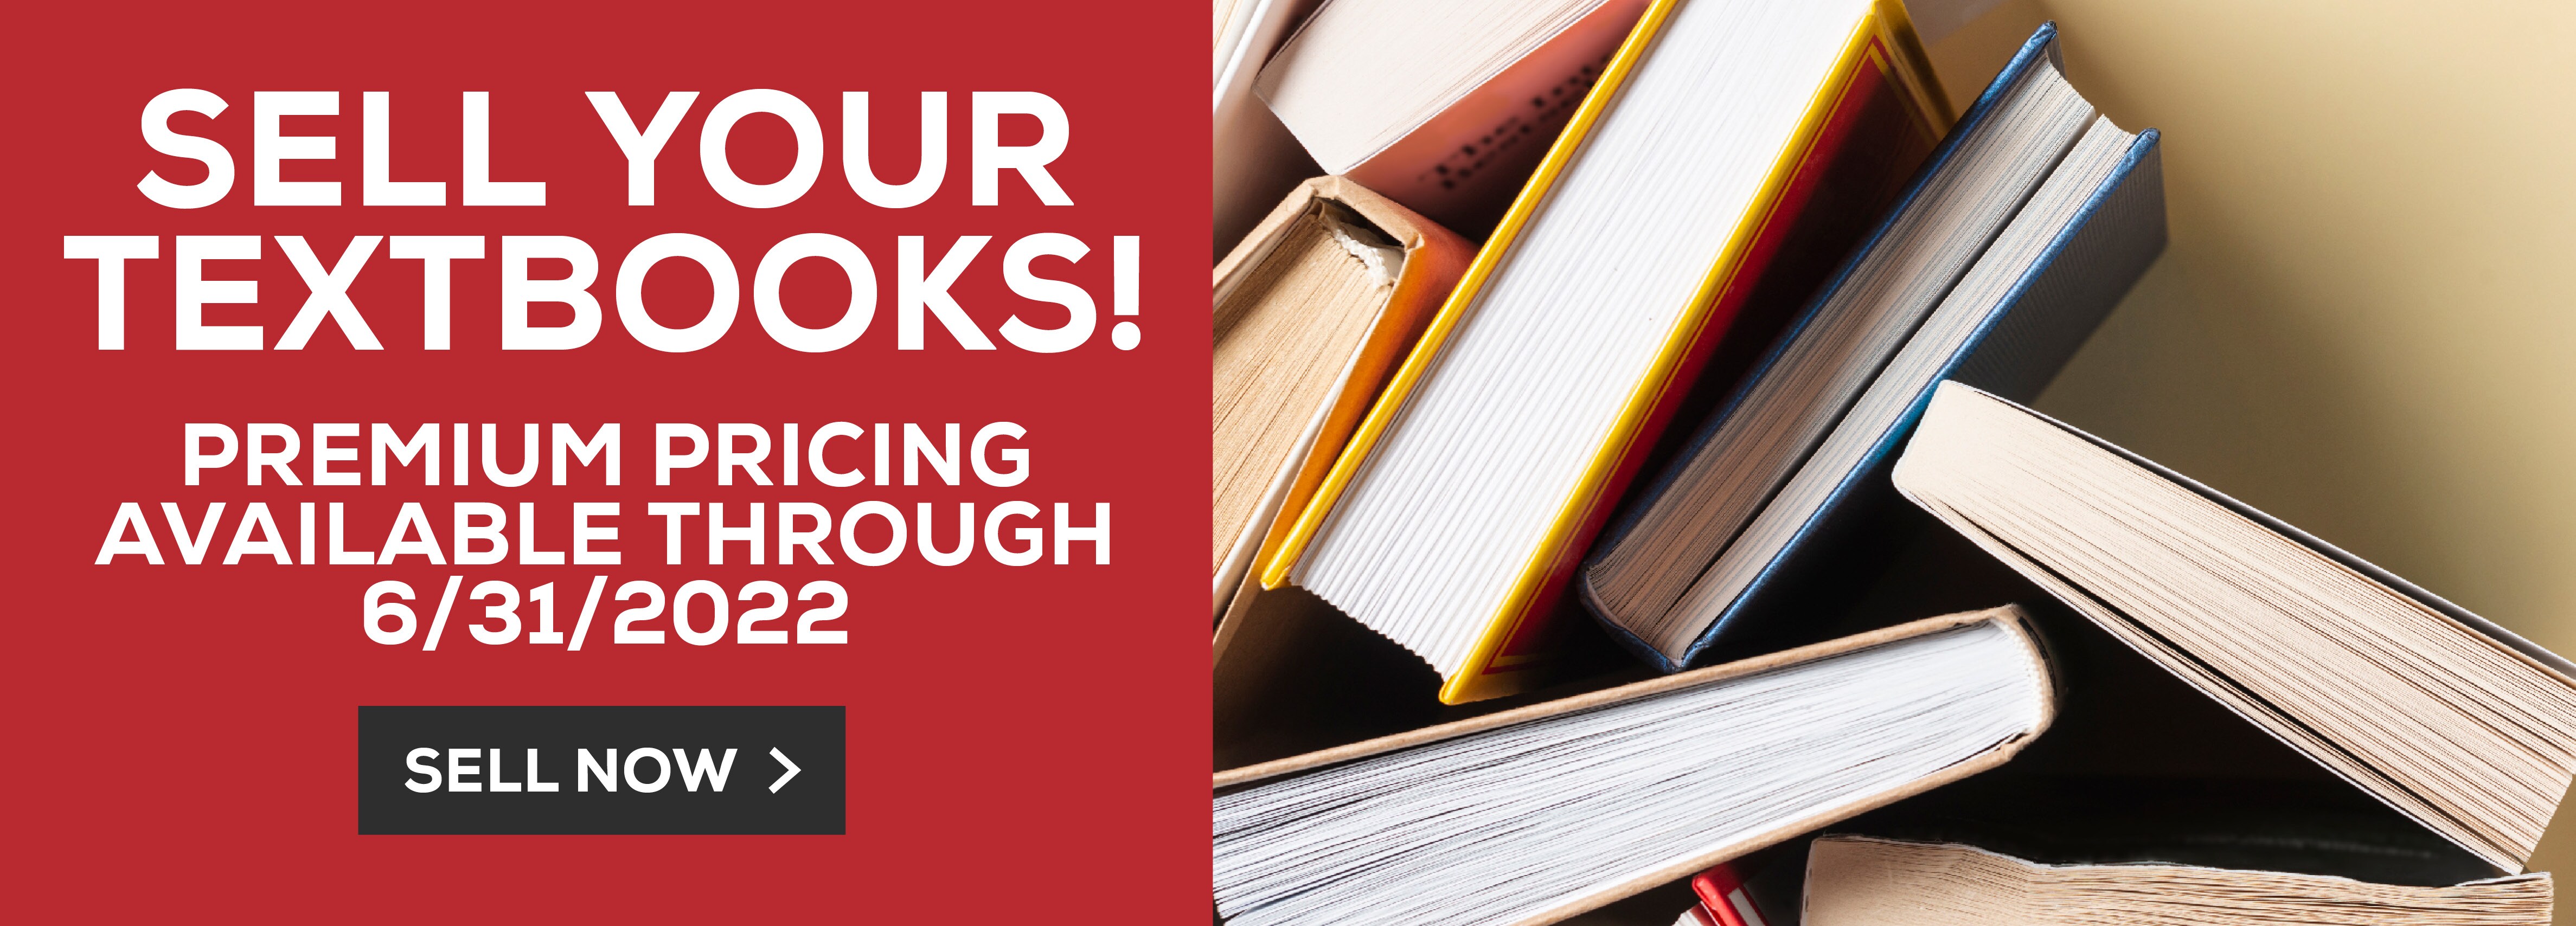 Sell Your Textbooks! Premium pricing available through June 30. Sell Now!					